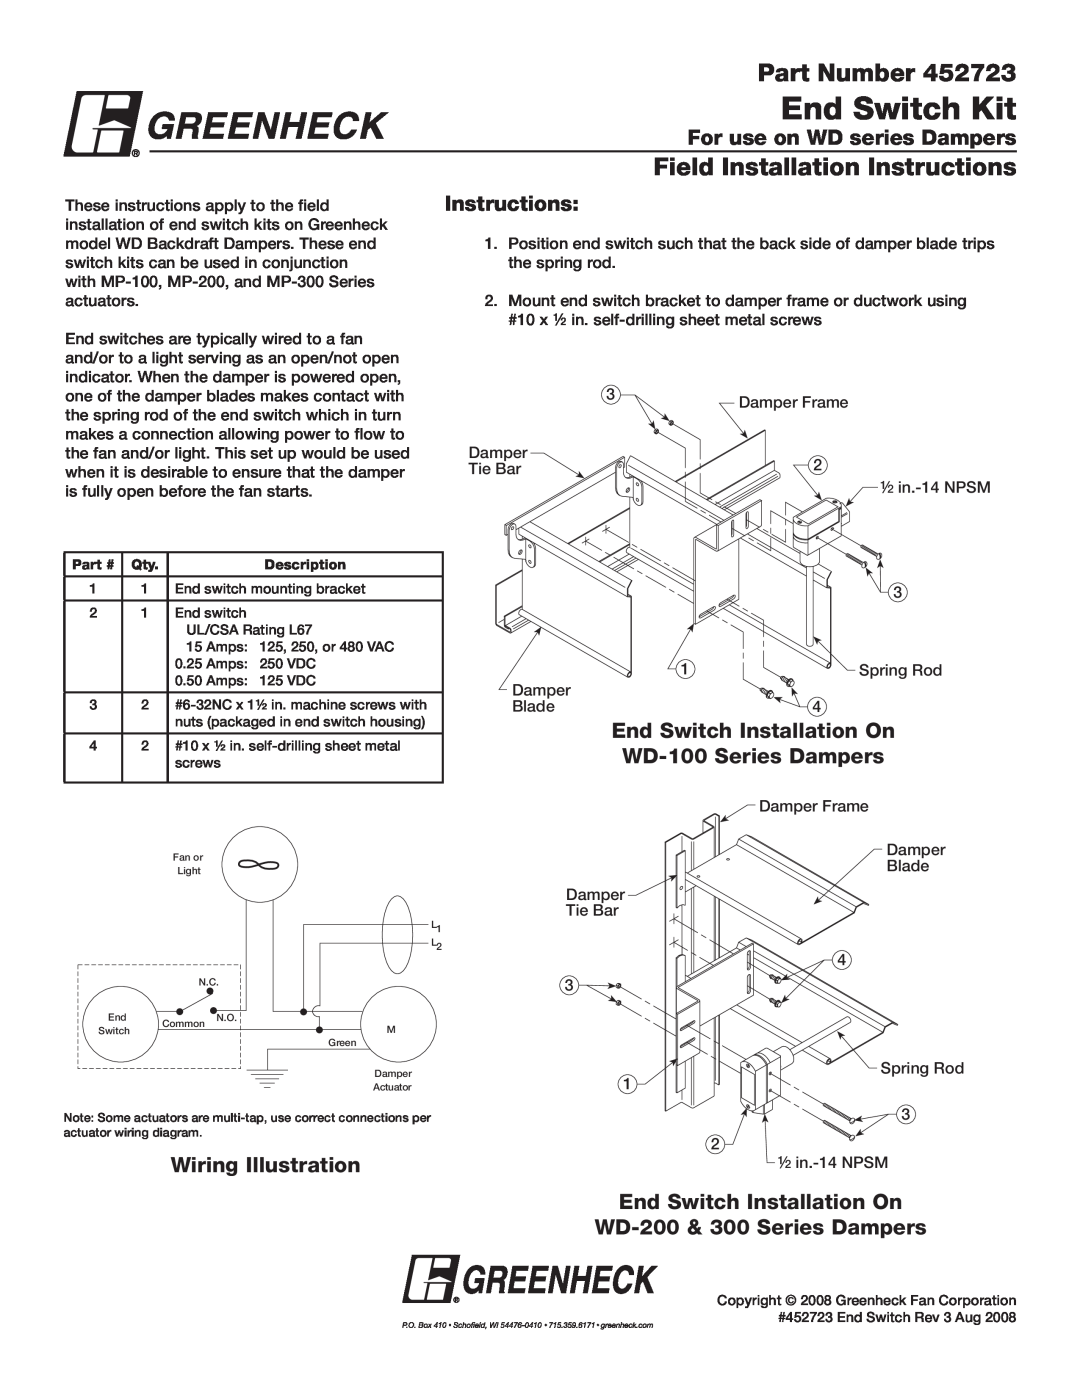 Greenheck Fan WD Series installation instructions End Switch Kit, Part Number, Field Installation Instructions 